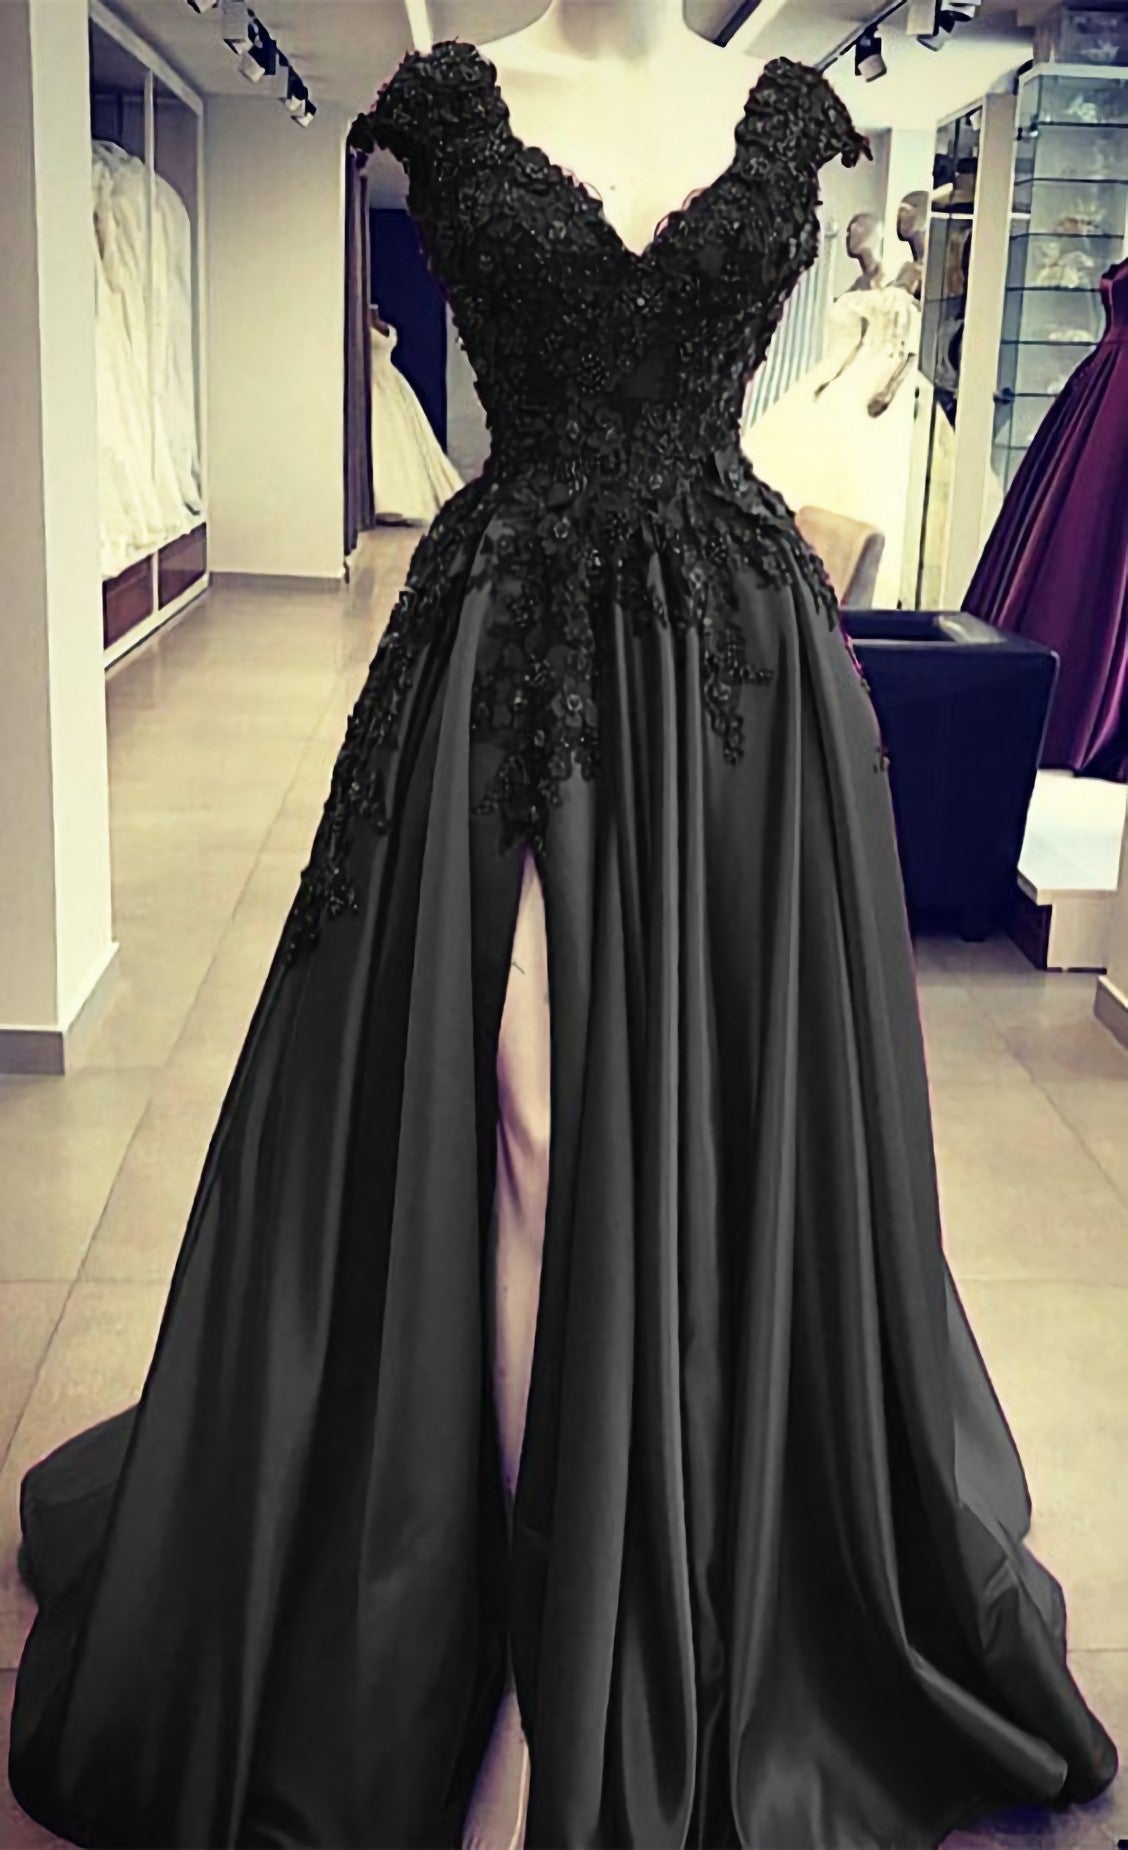 Dinner Dress Classy, Black Satin Slit Dresses, With Lace Embroidery Prom Dresses